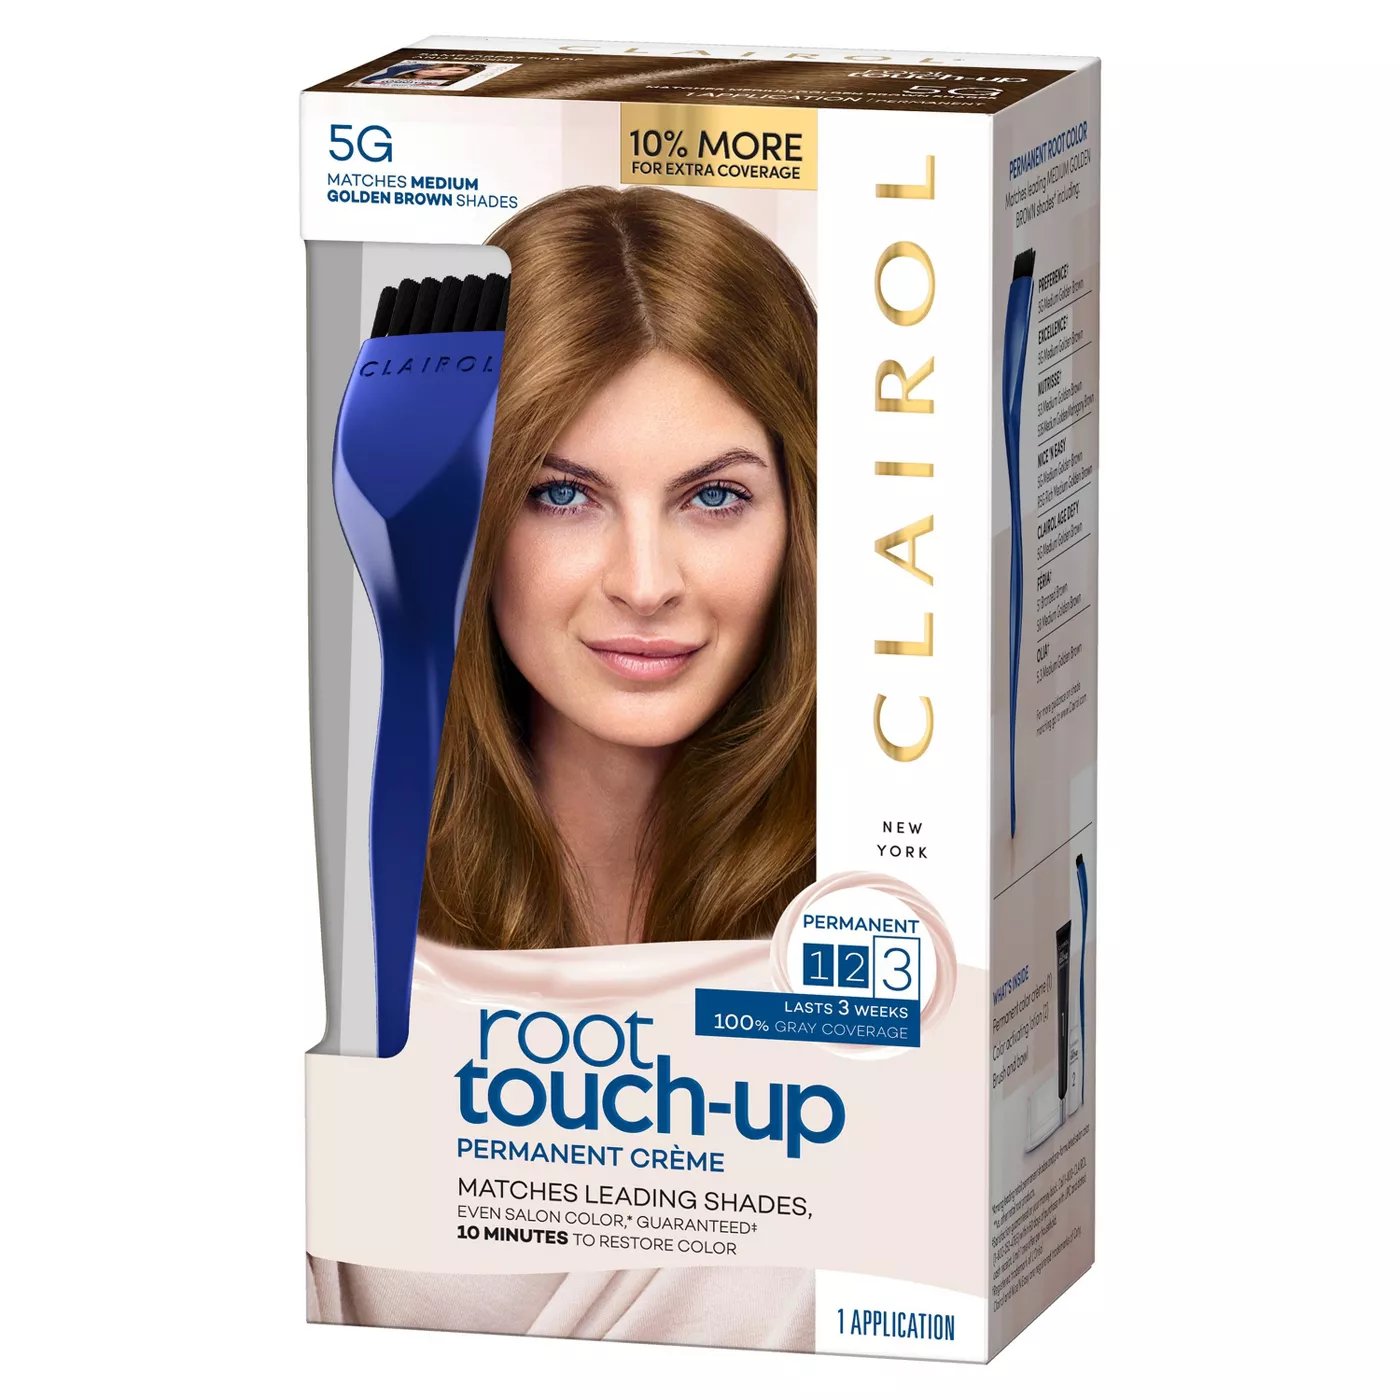 Clairol Root Touch Up Permanent Creme Hair Color 5g Matches Medium Golden Brown Shades